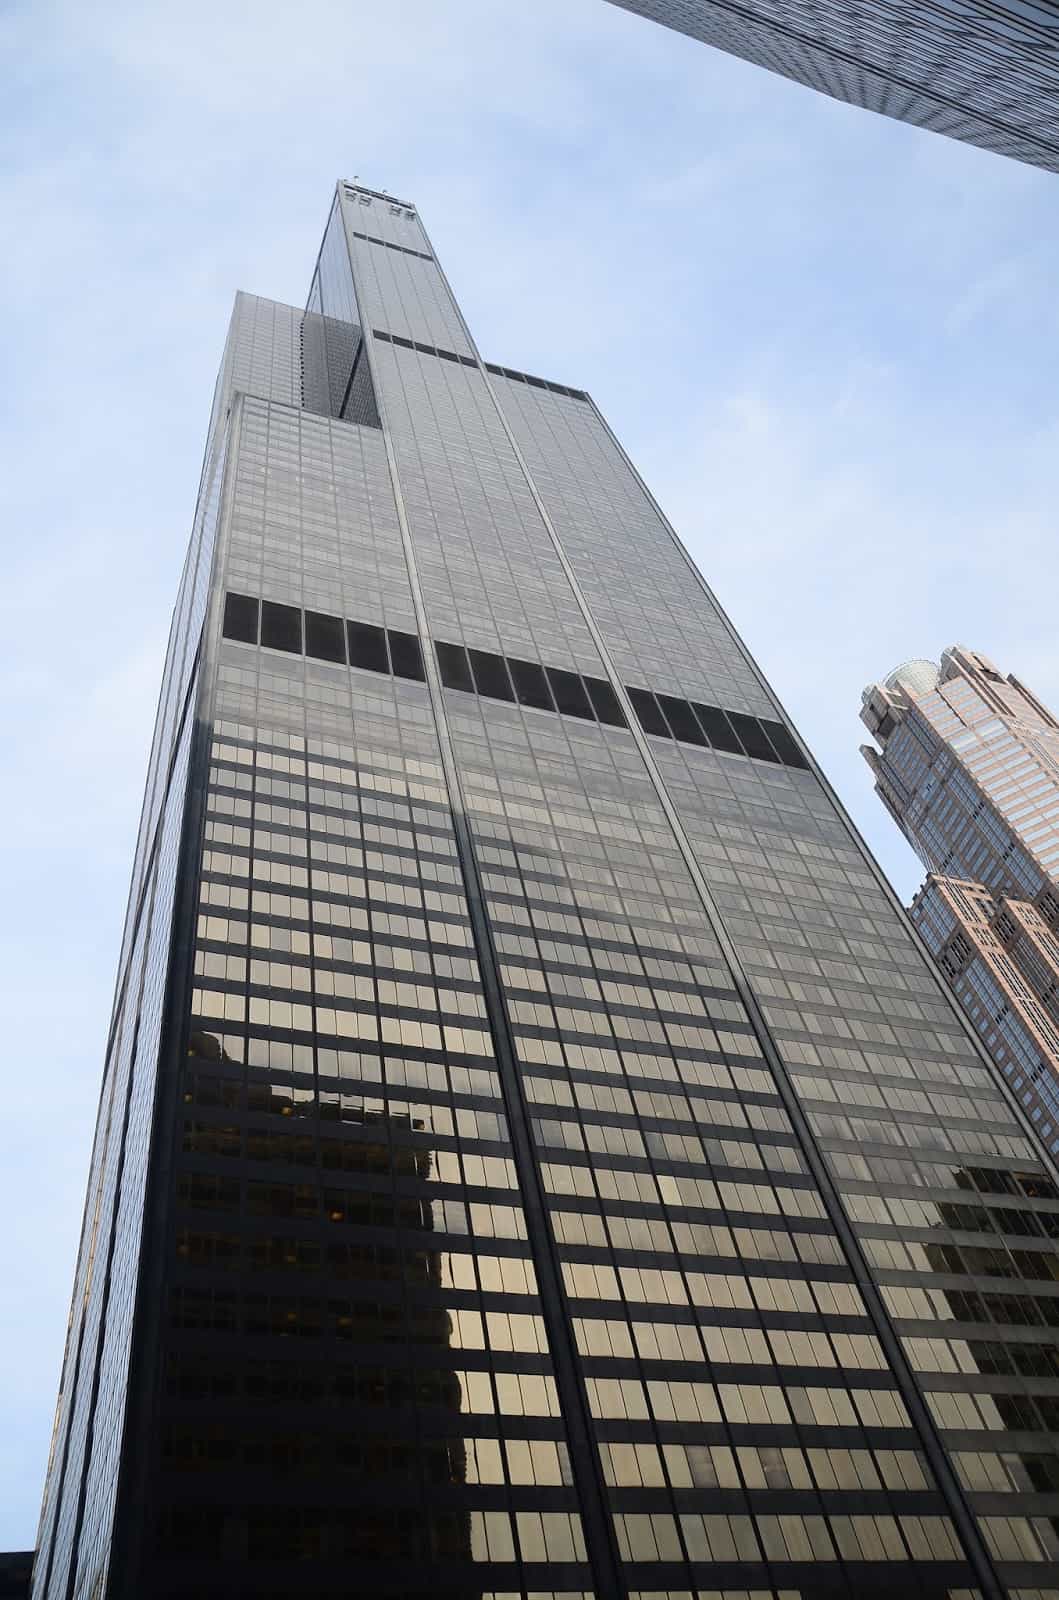 Willis Tower (Sears Tower) in Chicago